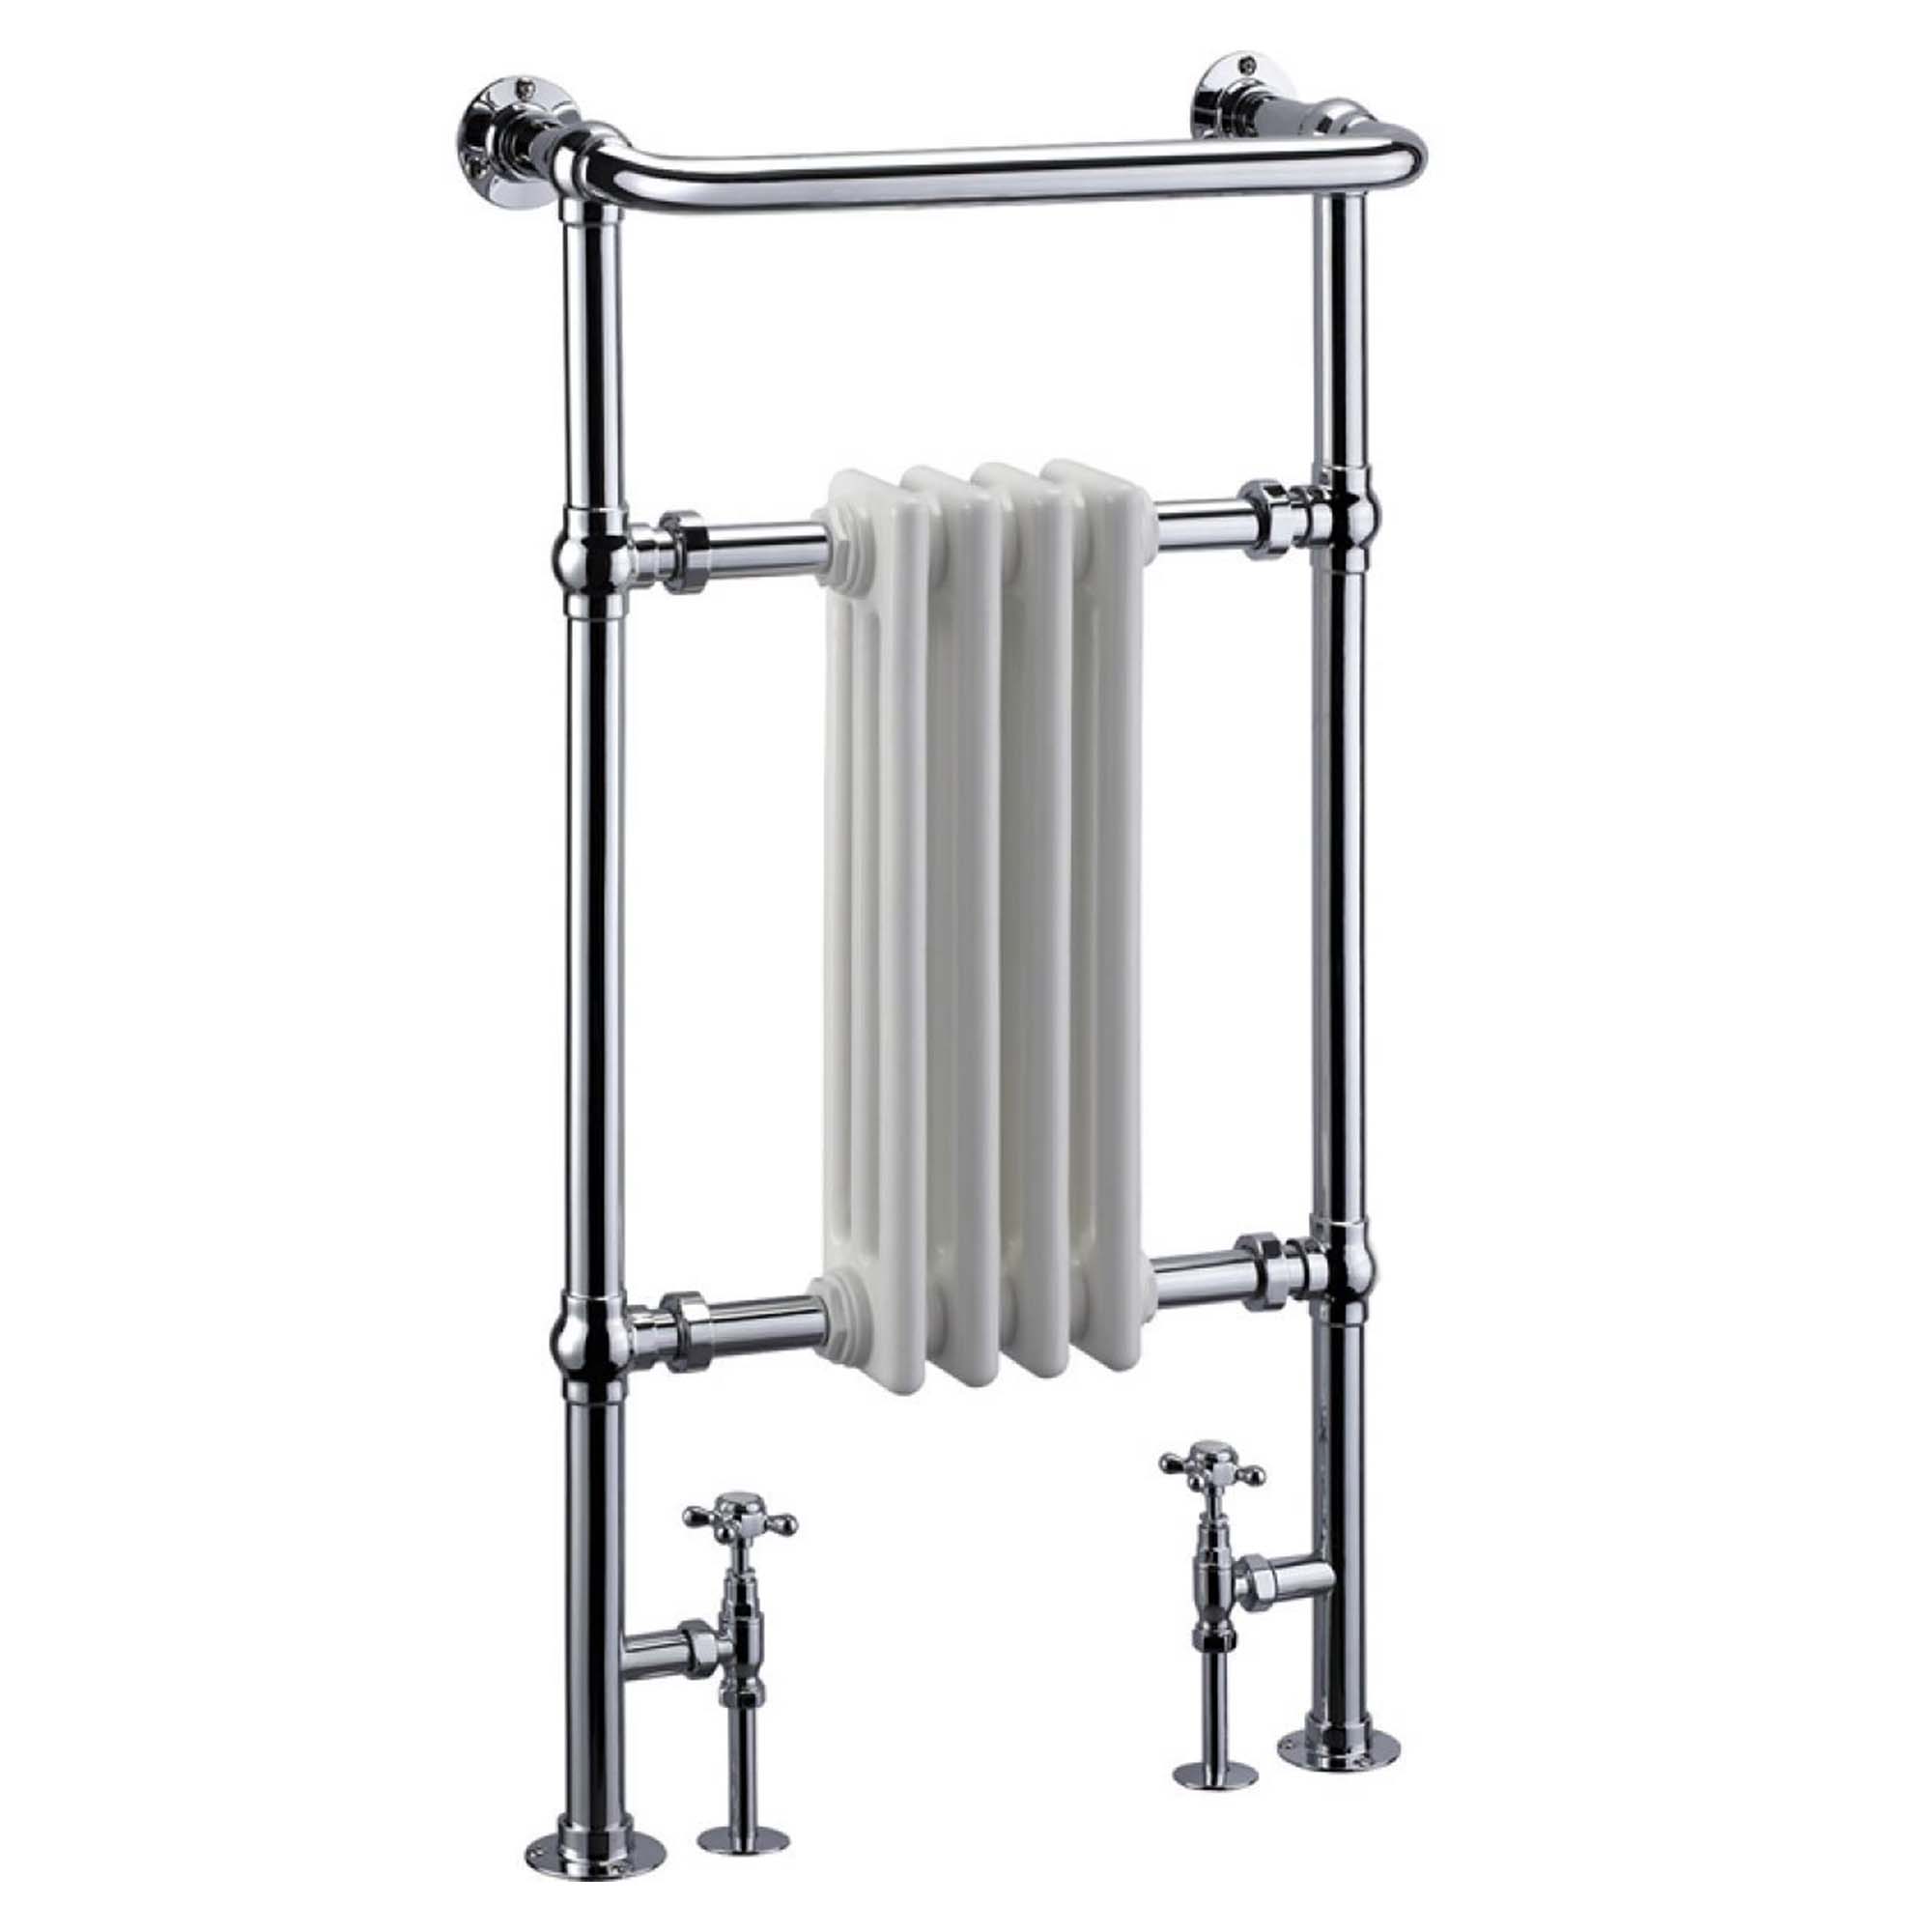 burlington bloomsbury traditional radiator chrome with white accent